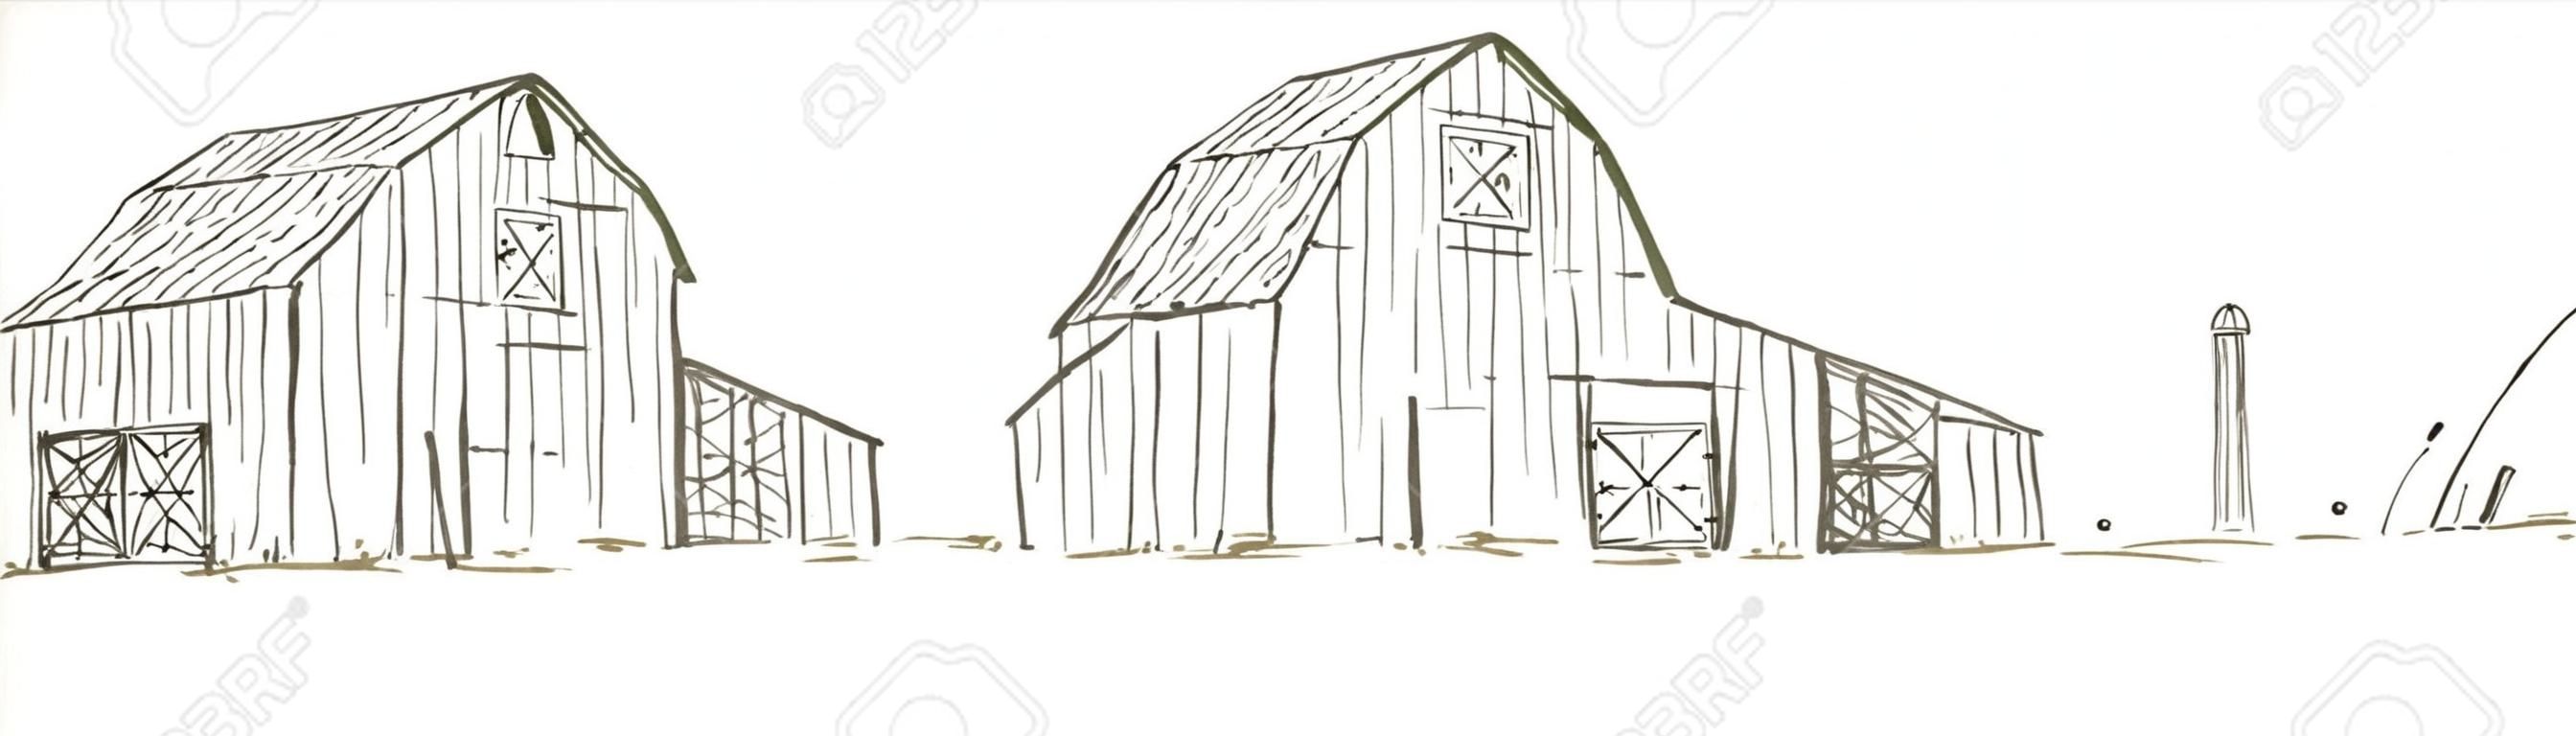 Pen and ink style illustration of an old barn/farm scene.